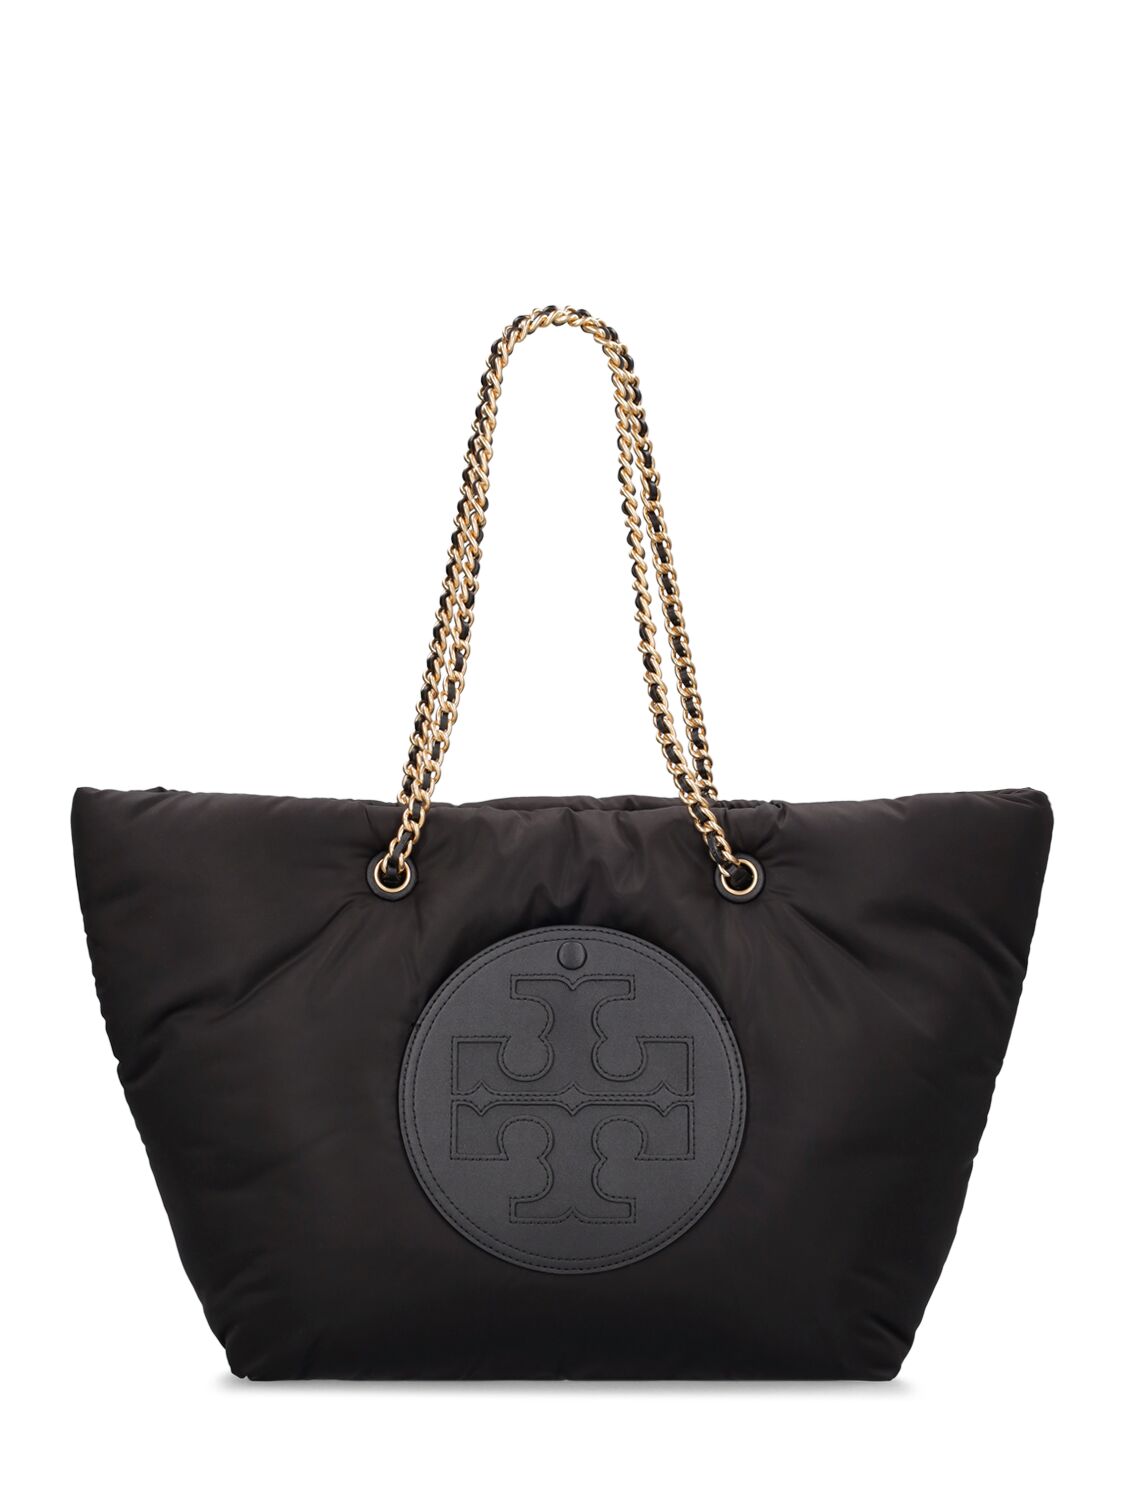 Image of Ella Puffy Chain Tote Leather Bag